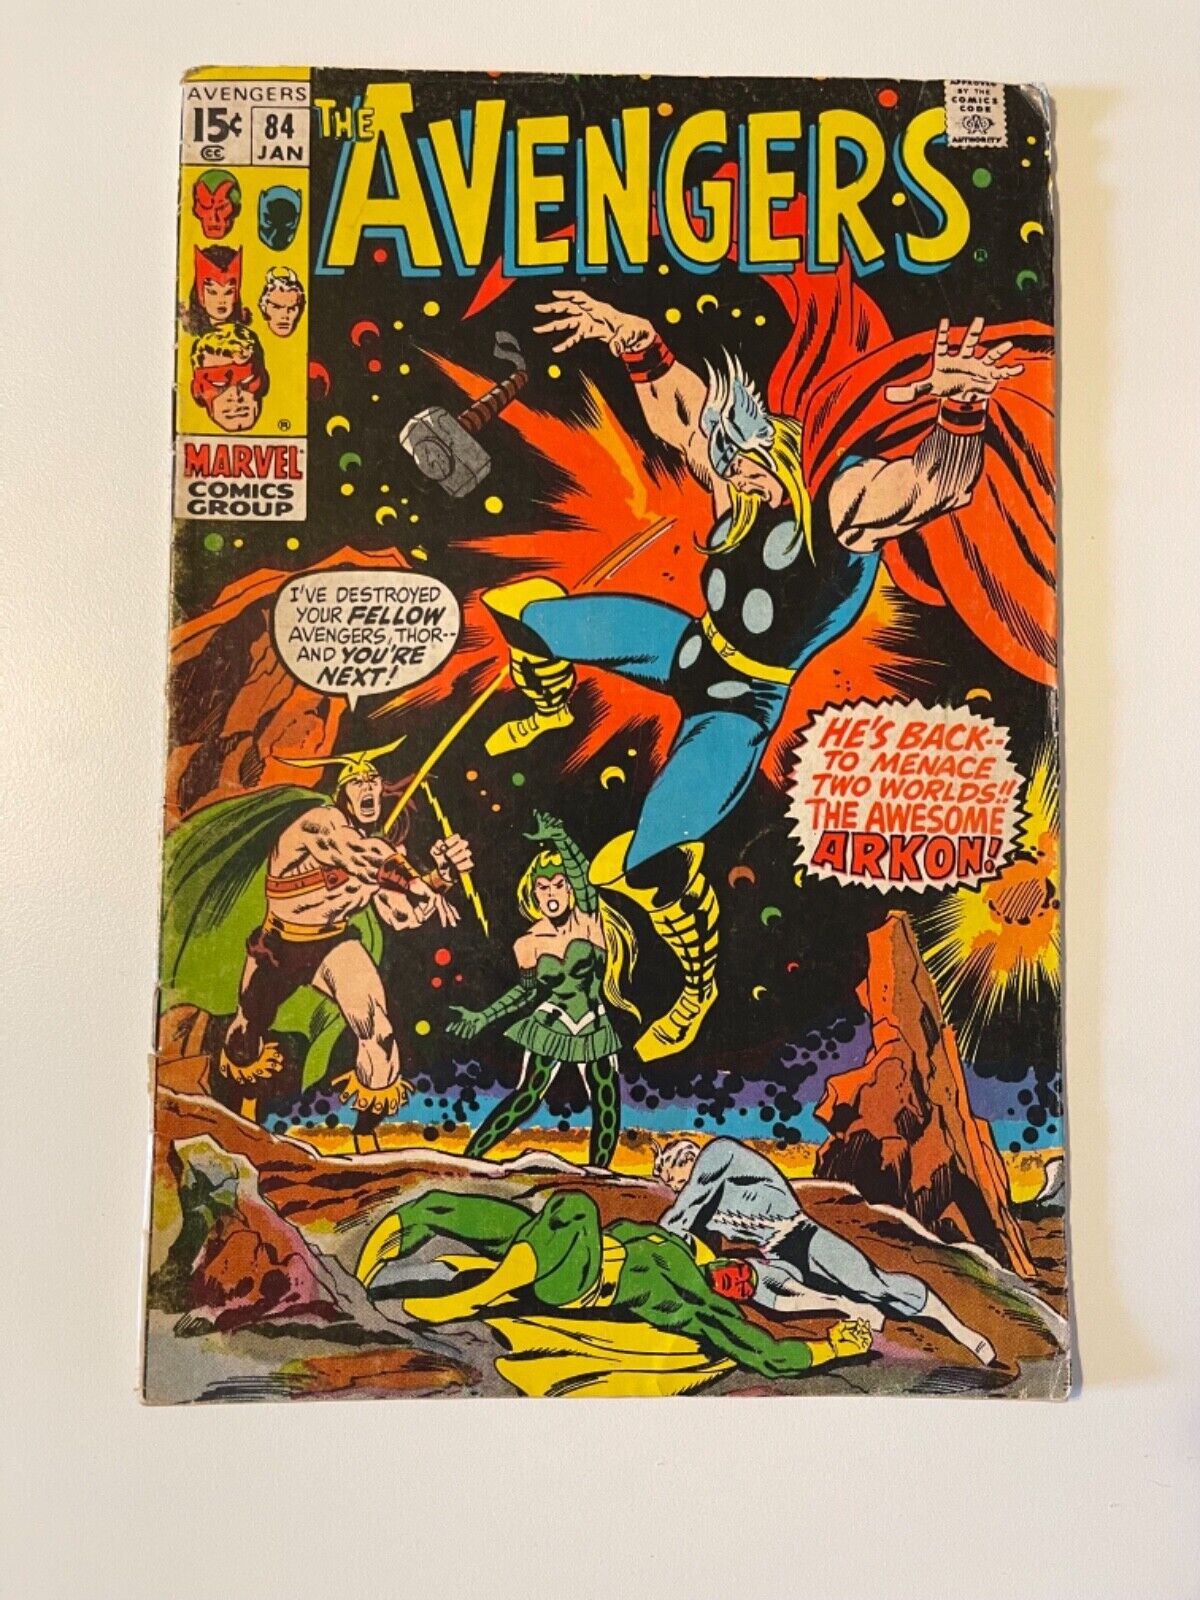 Avengers #84 (Marvel, 1970) Classic John Buscema cover. Off white pages